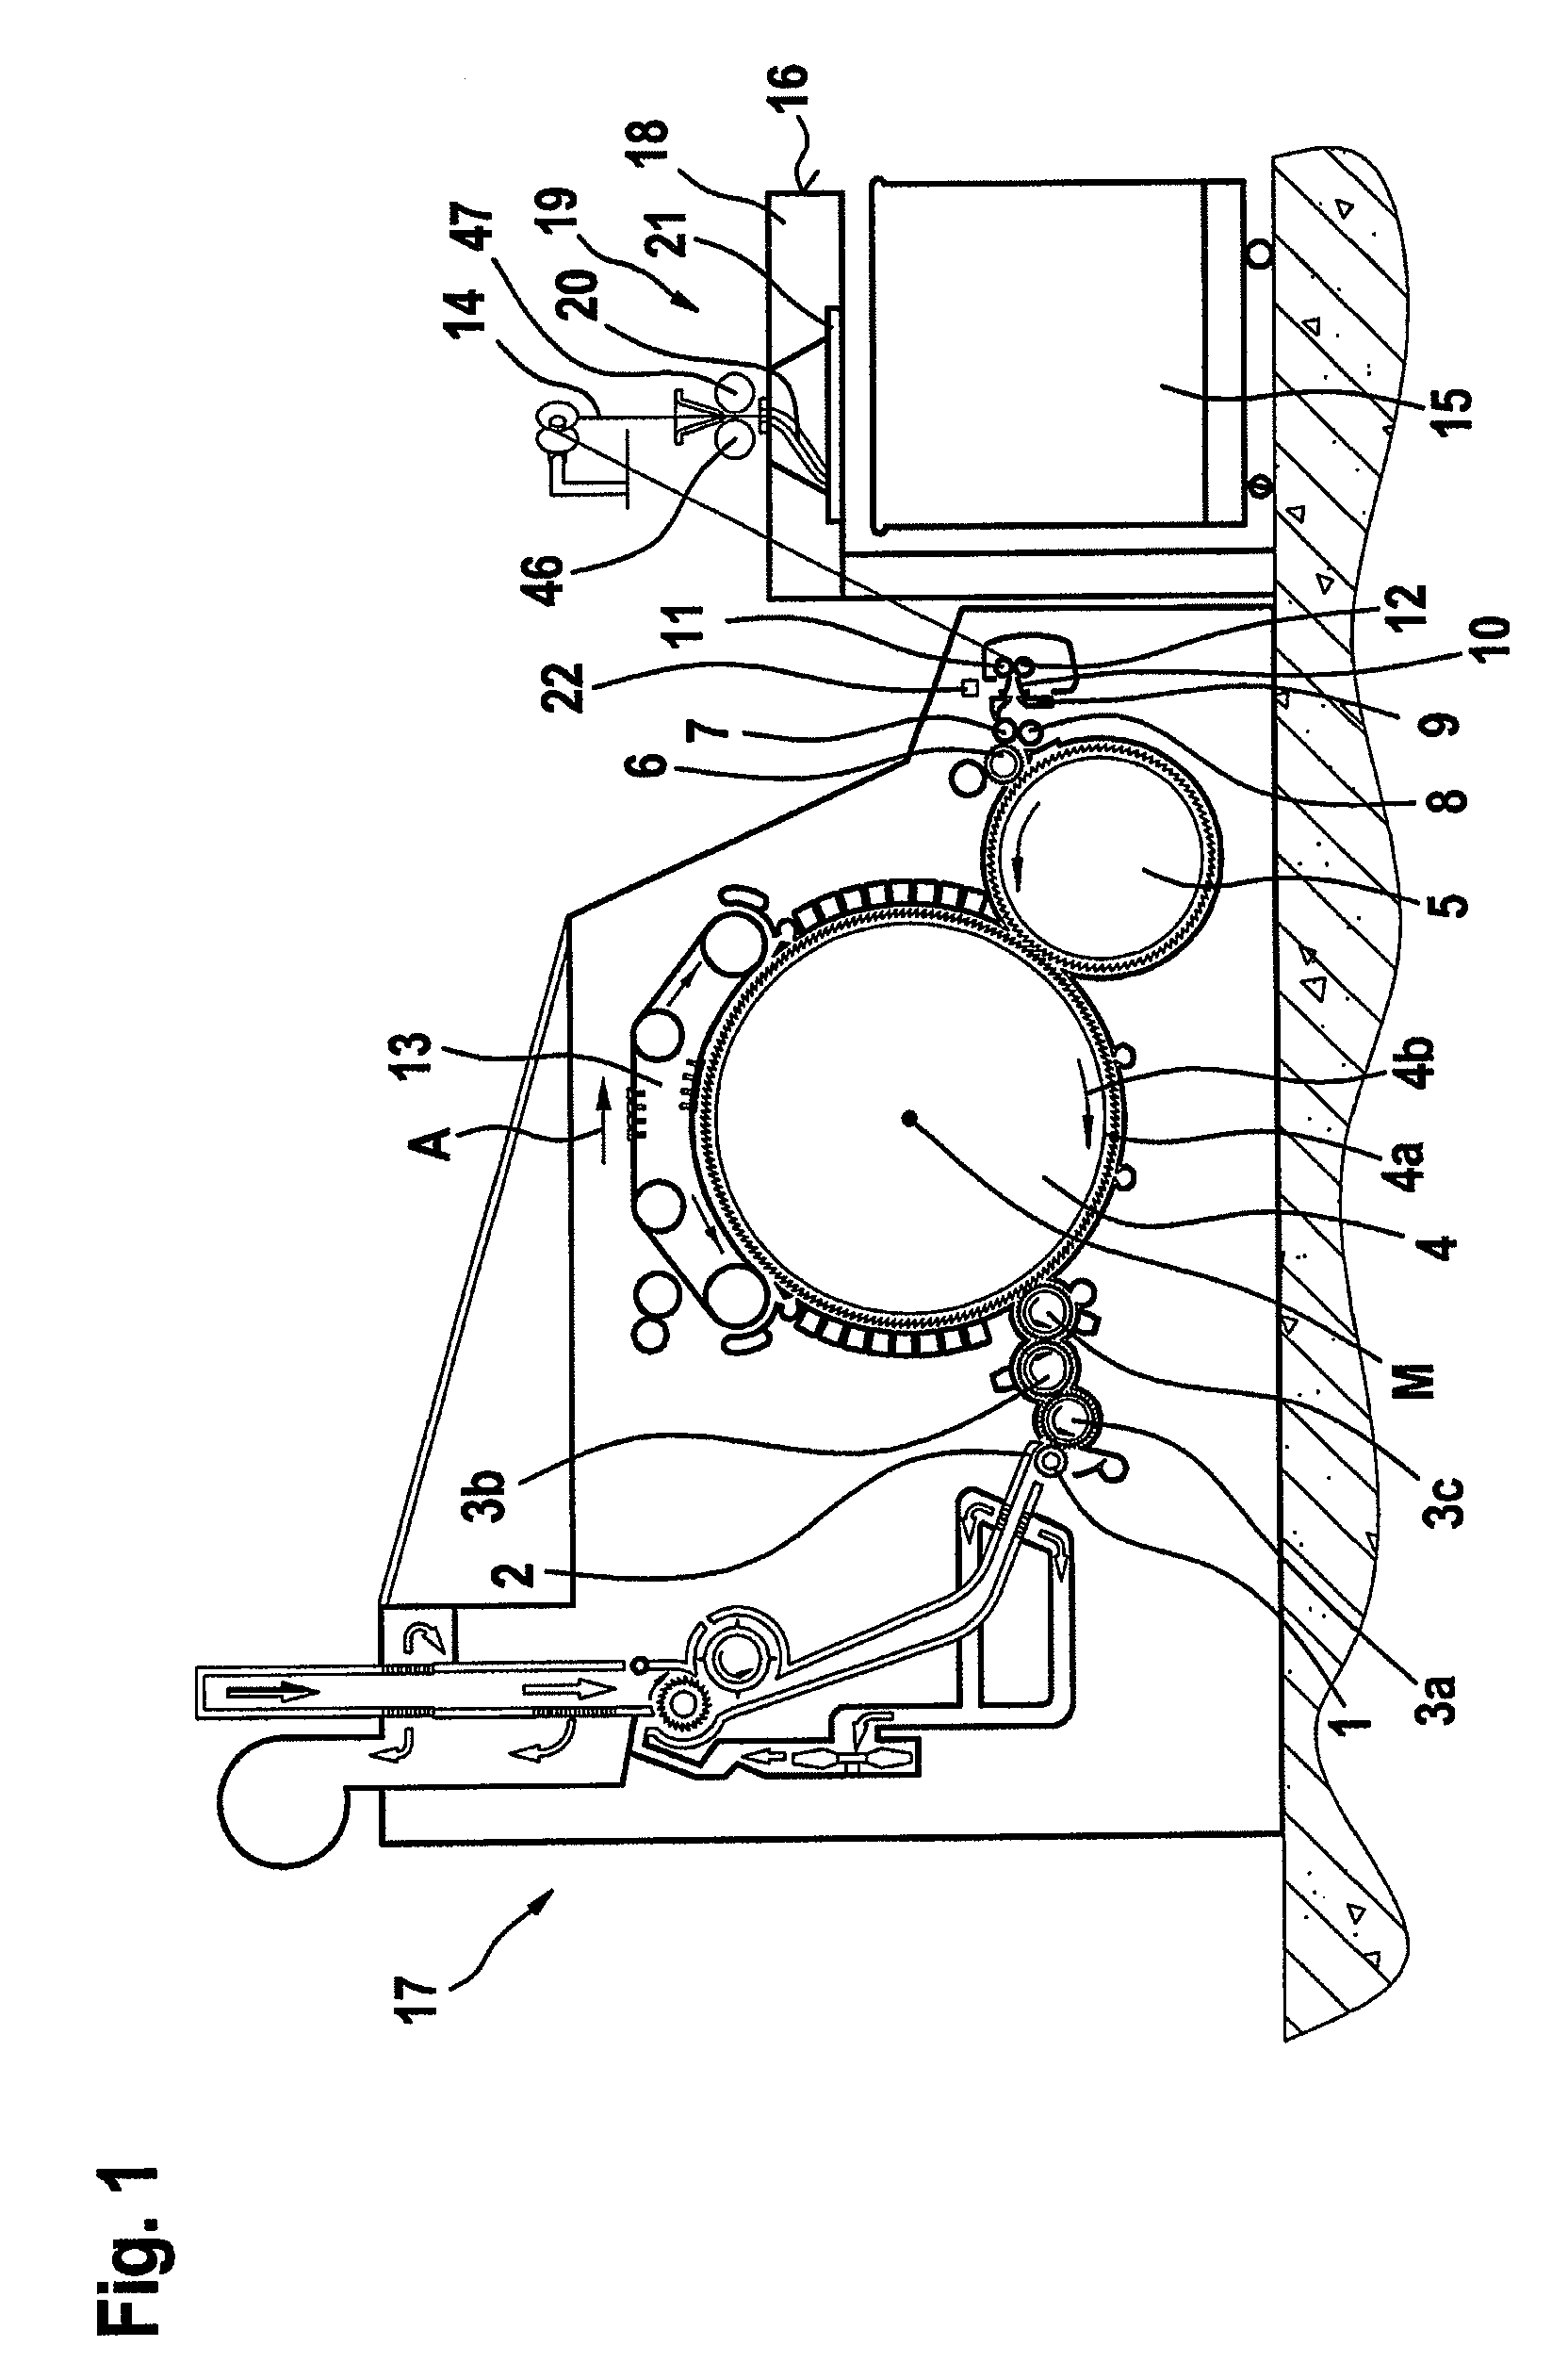 Apparatus on a spinning preparation machine for ascertaining the mass and/or fluctuations in the mass of a fibre material